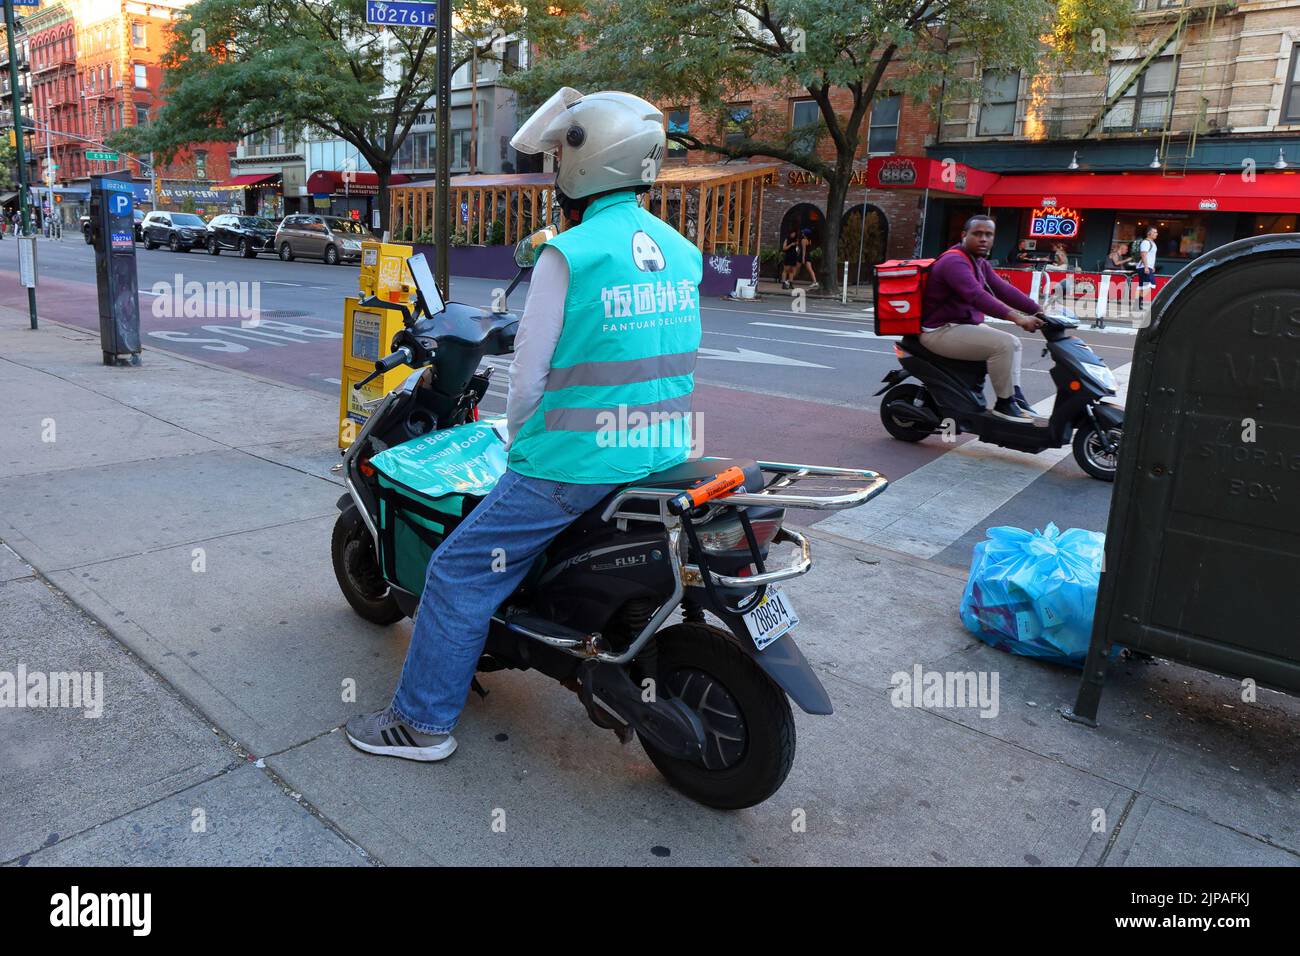 Fantuan Delivery and Grubhub delivery workers on electric mopeds in Manhattan's East Village neighborhood, New York City. 飯糰外賣 Food delivery gig workers. Stock Photo